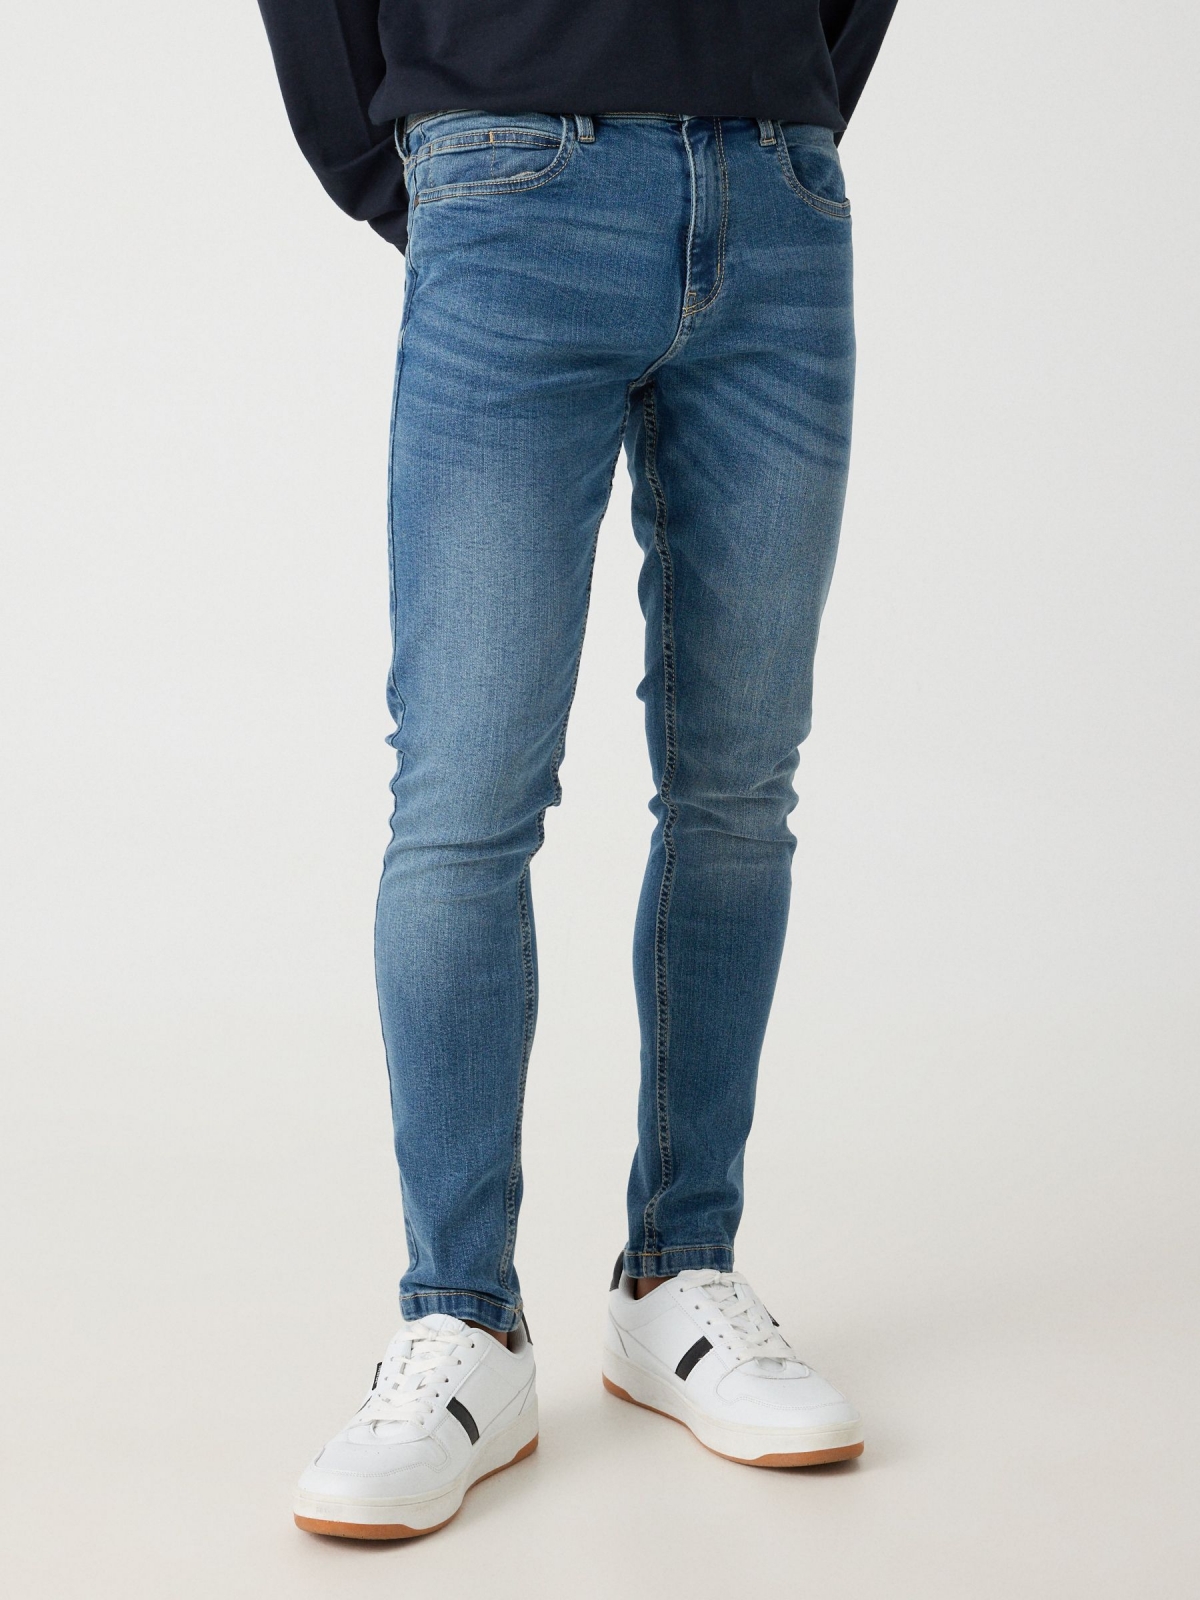 Worn skinny jeans blue middle front view